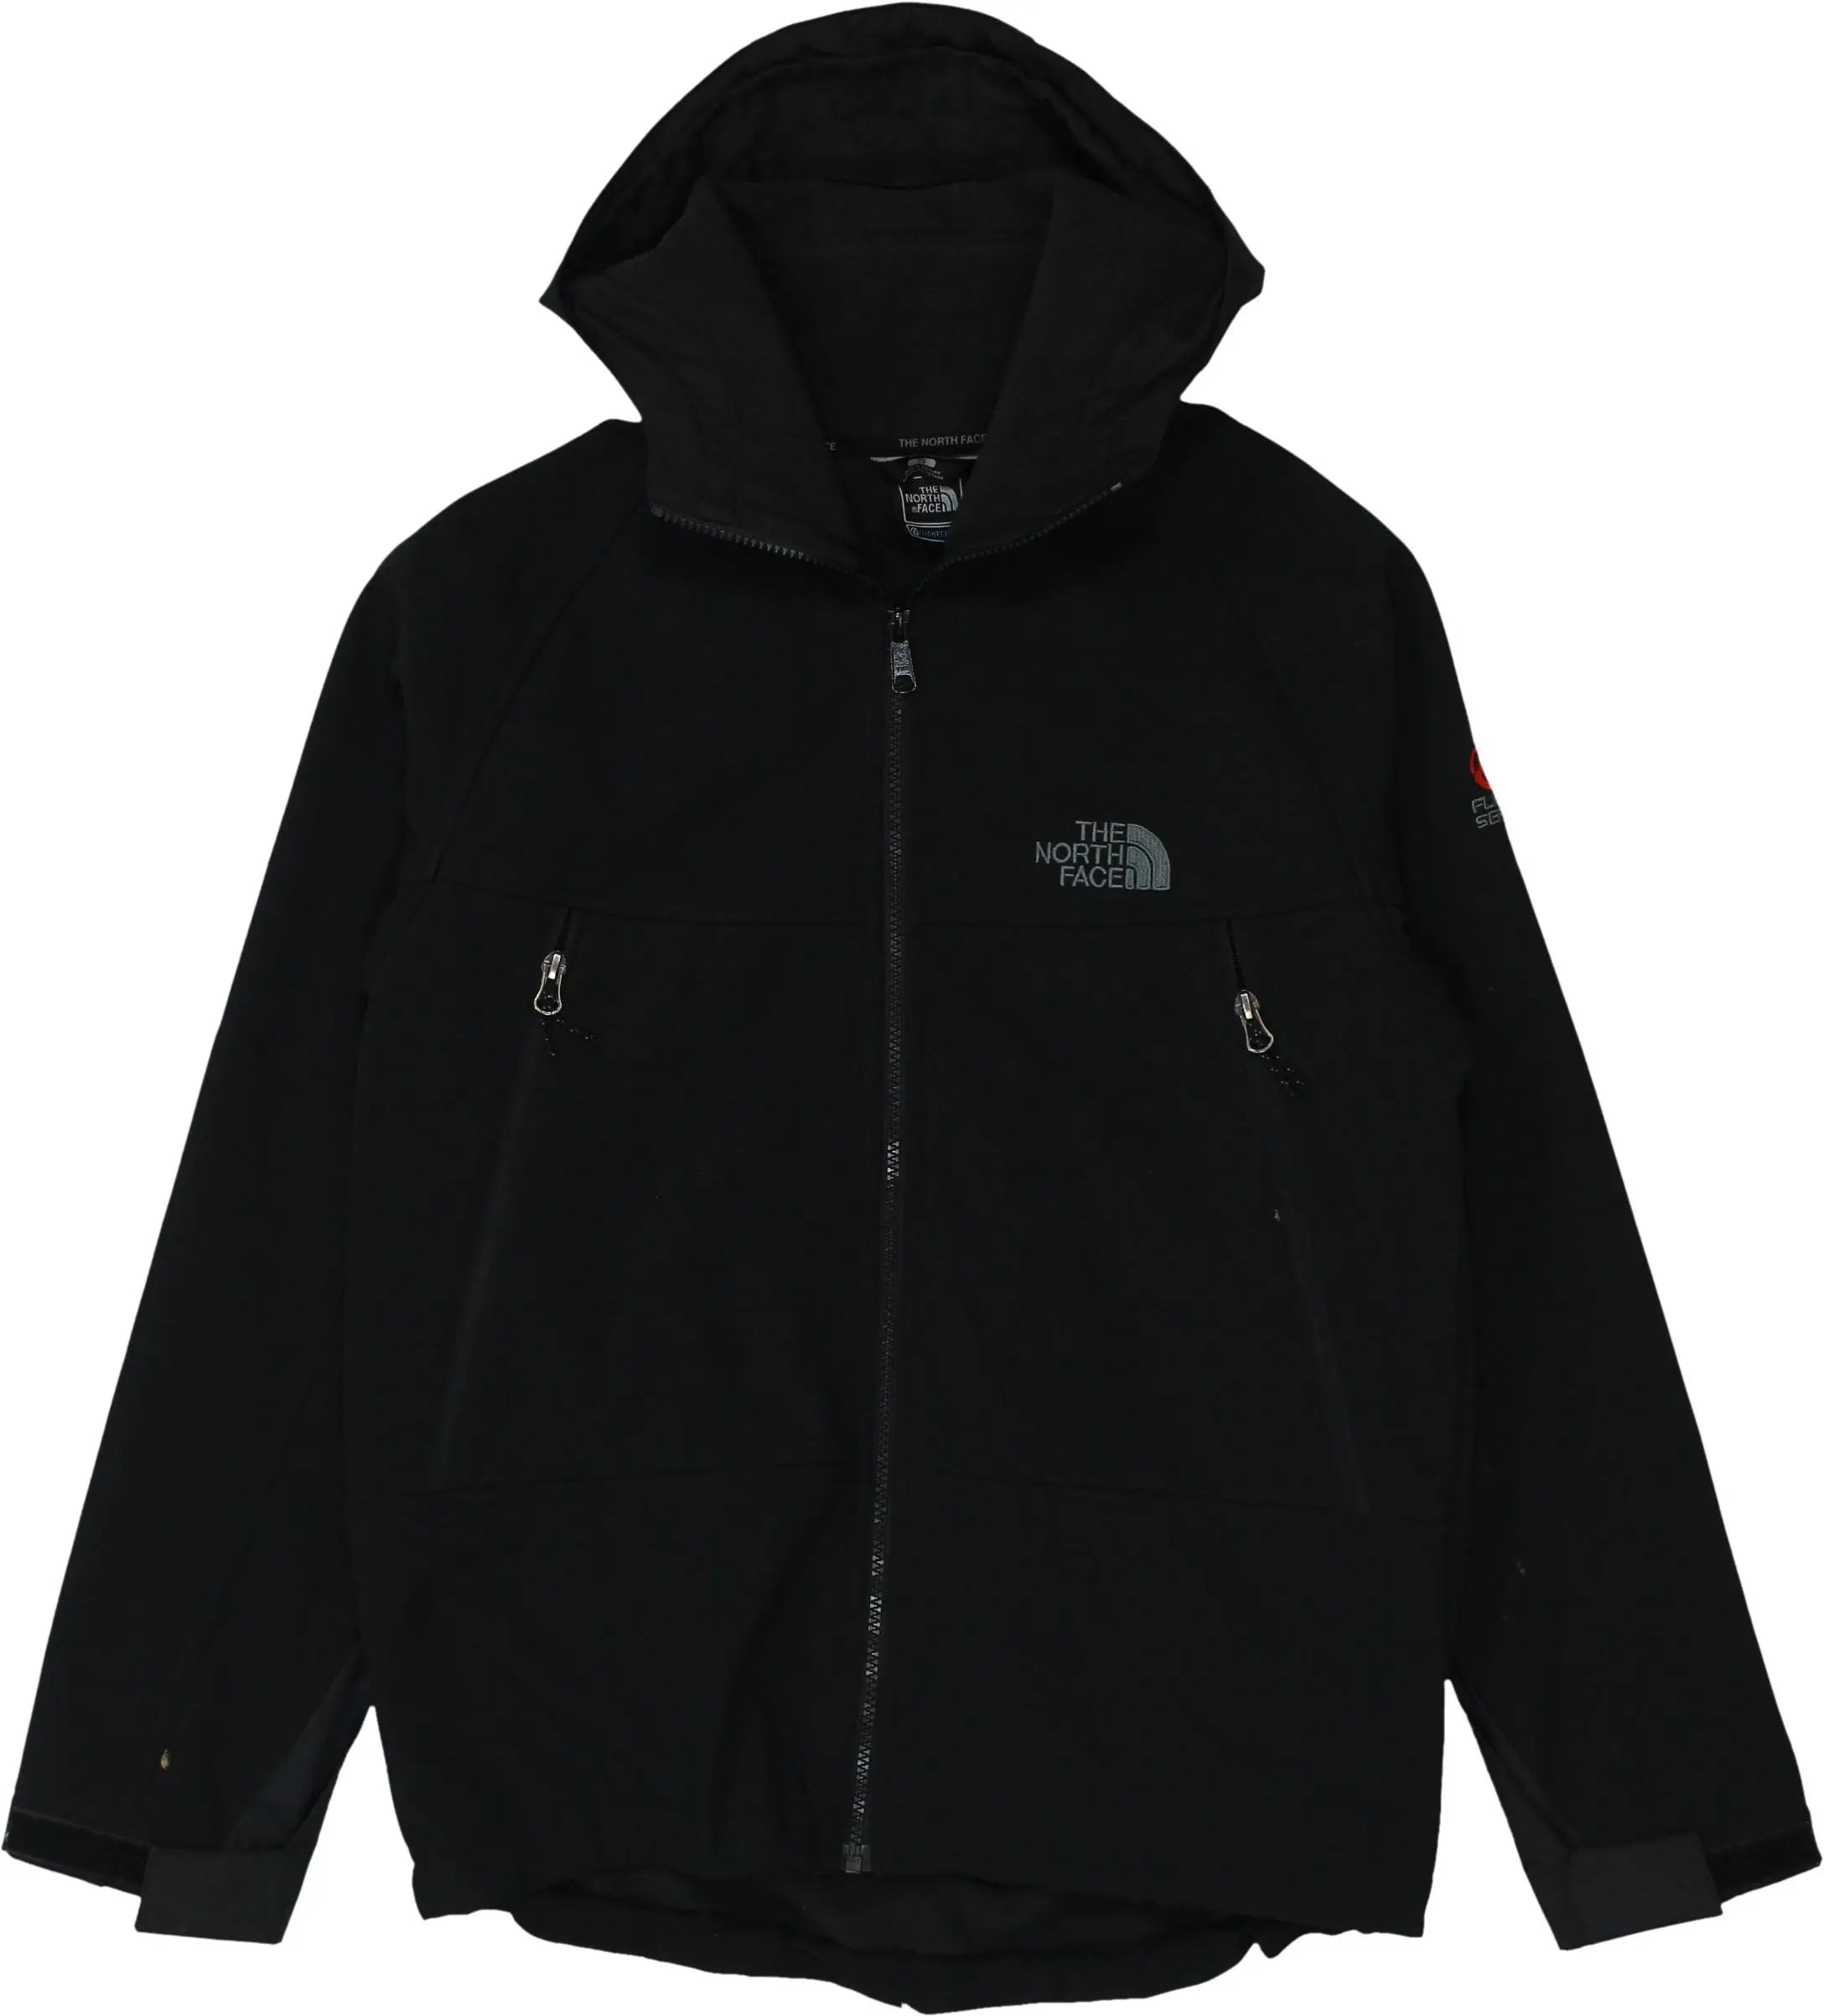 The North Face - Black The North Face Jacket- ThriftTale.com - Vintage and second handclothing